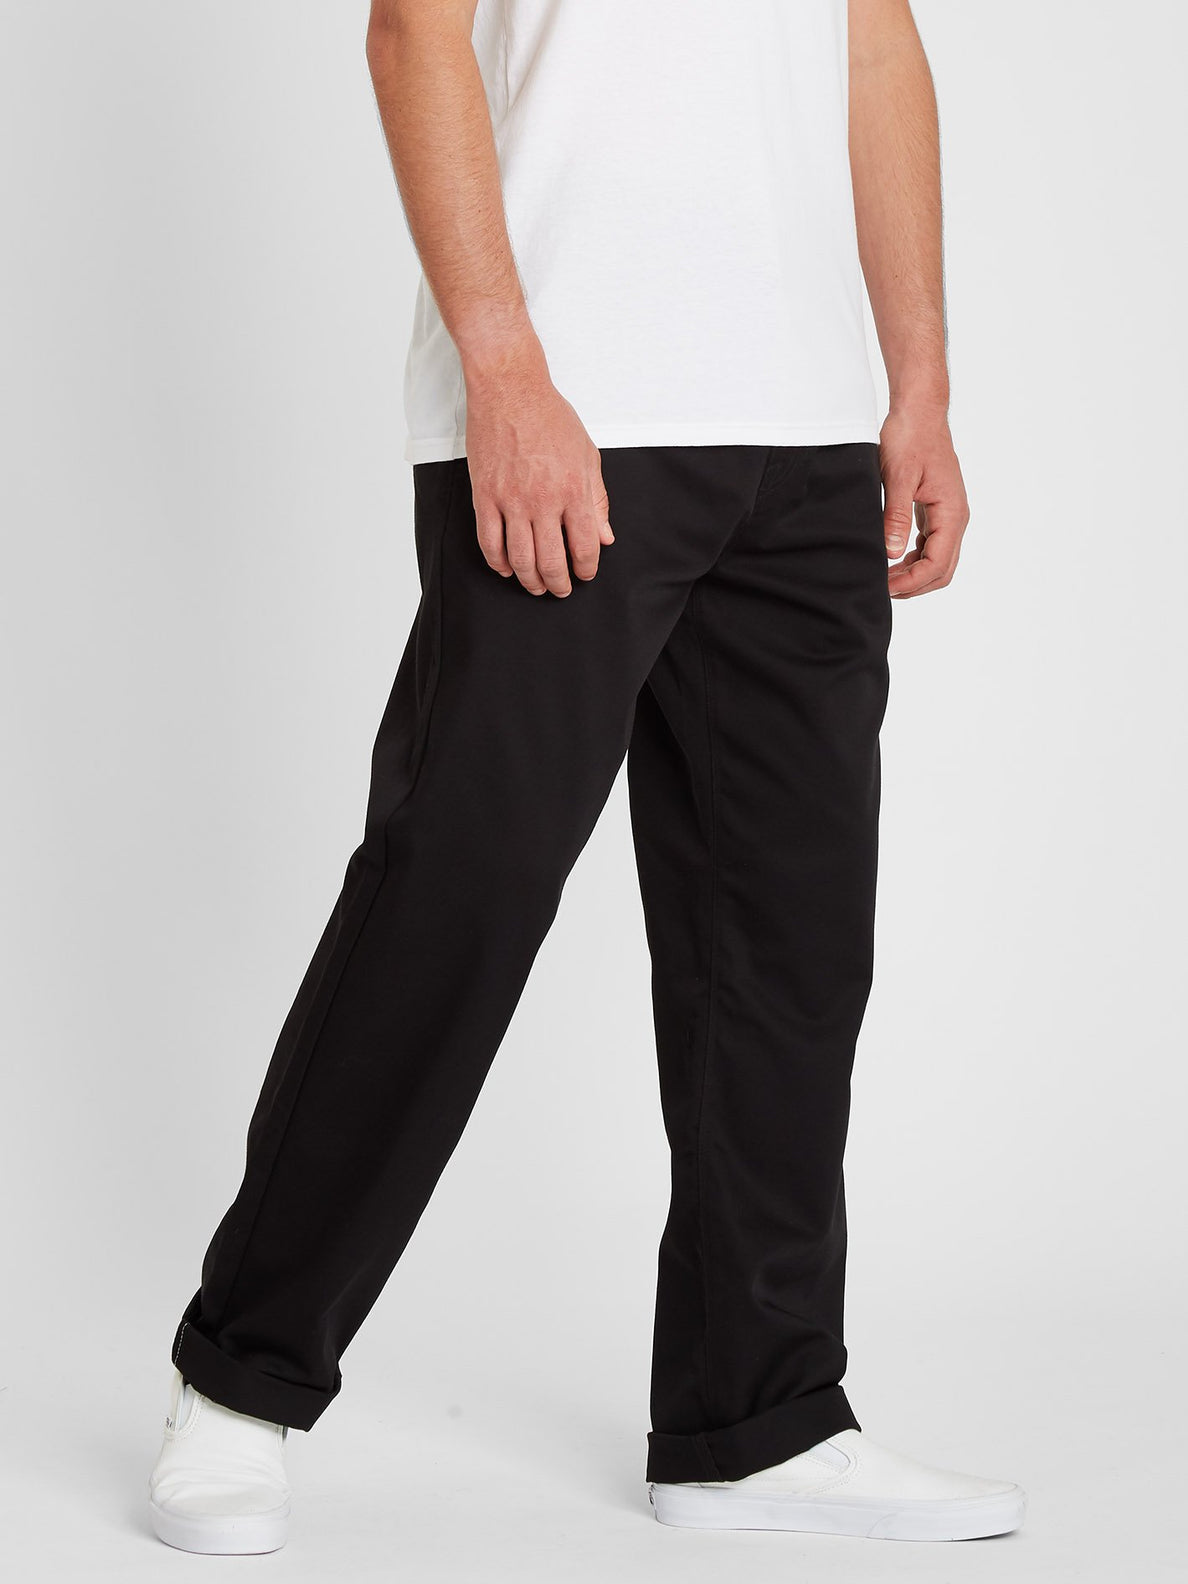 Substance Chino Pant - Black (A1112104_BLK) [3]